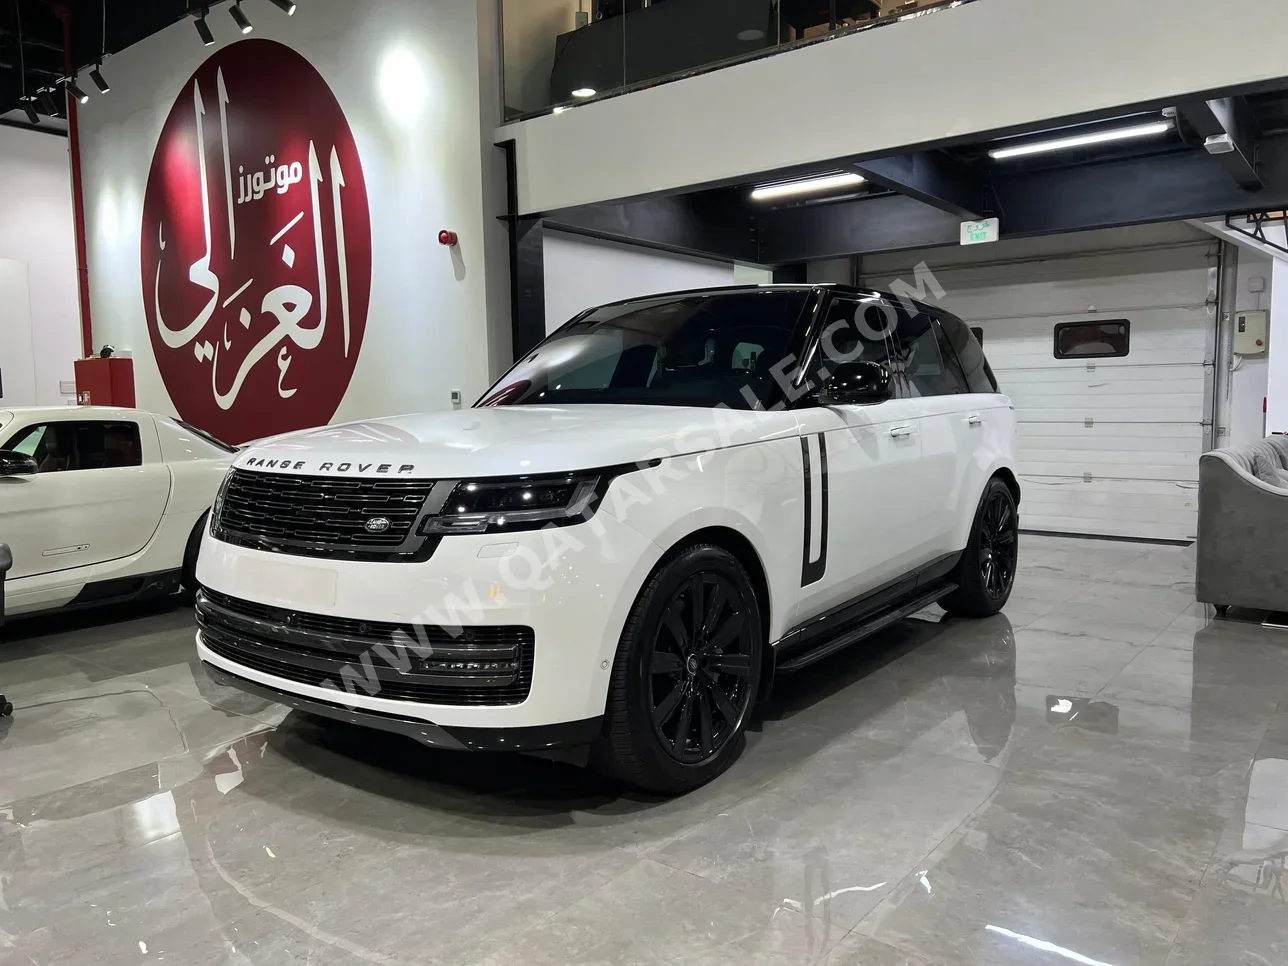  Land Rover  Range Rover  Vogue HSE  2023  Automatic  19,000 Km  8 Cylinder  Four Wheel Drive (4WD)  SUV  White  With Warranty